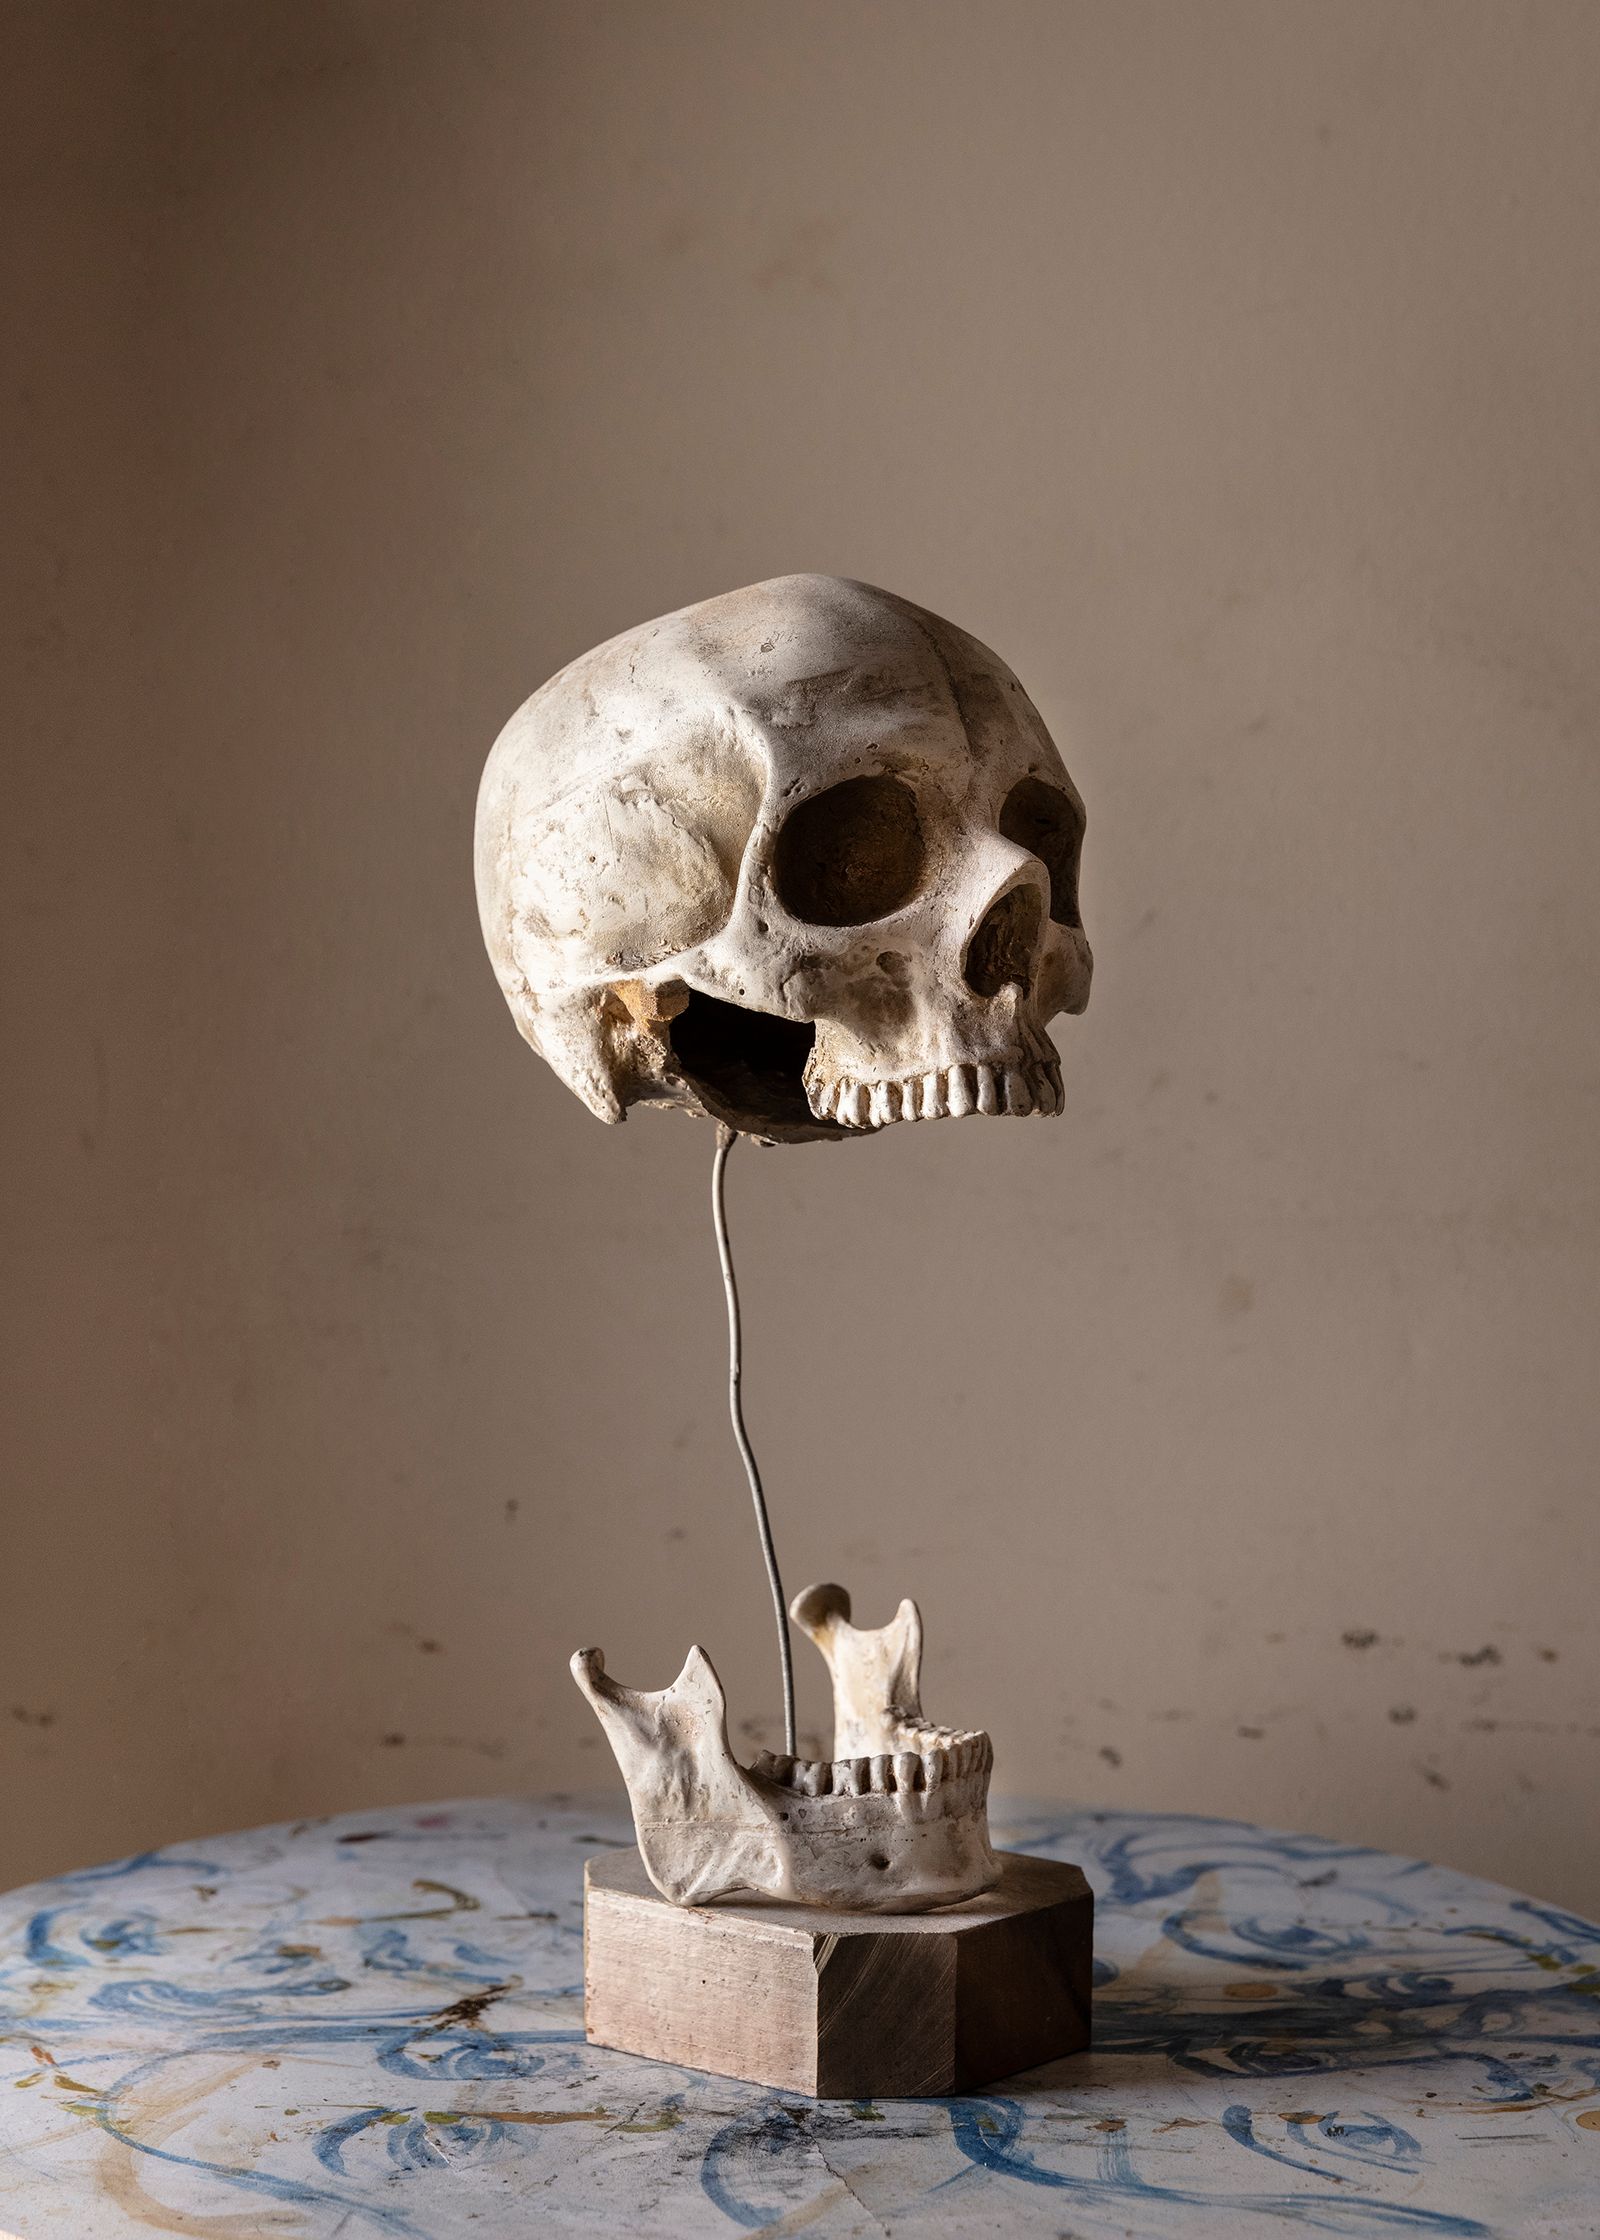 © Gui Christ - a broken skull dummy at one of the Crackland's residences.